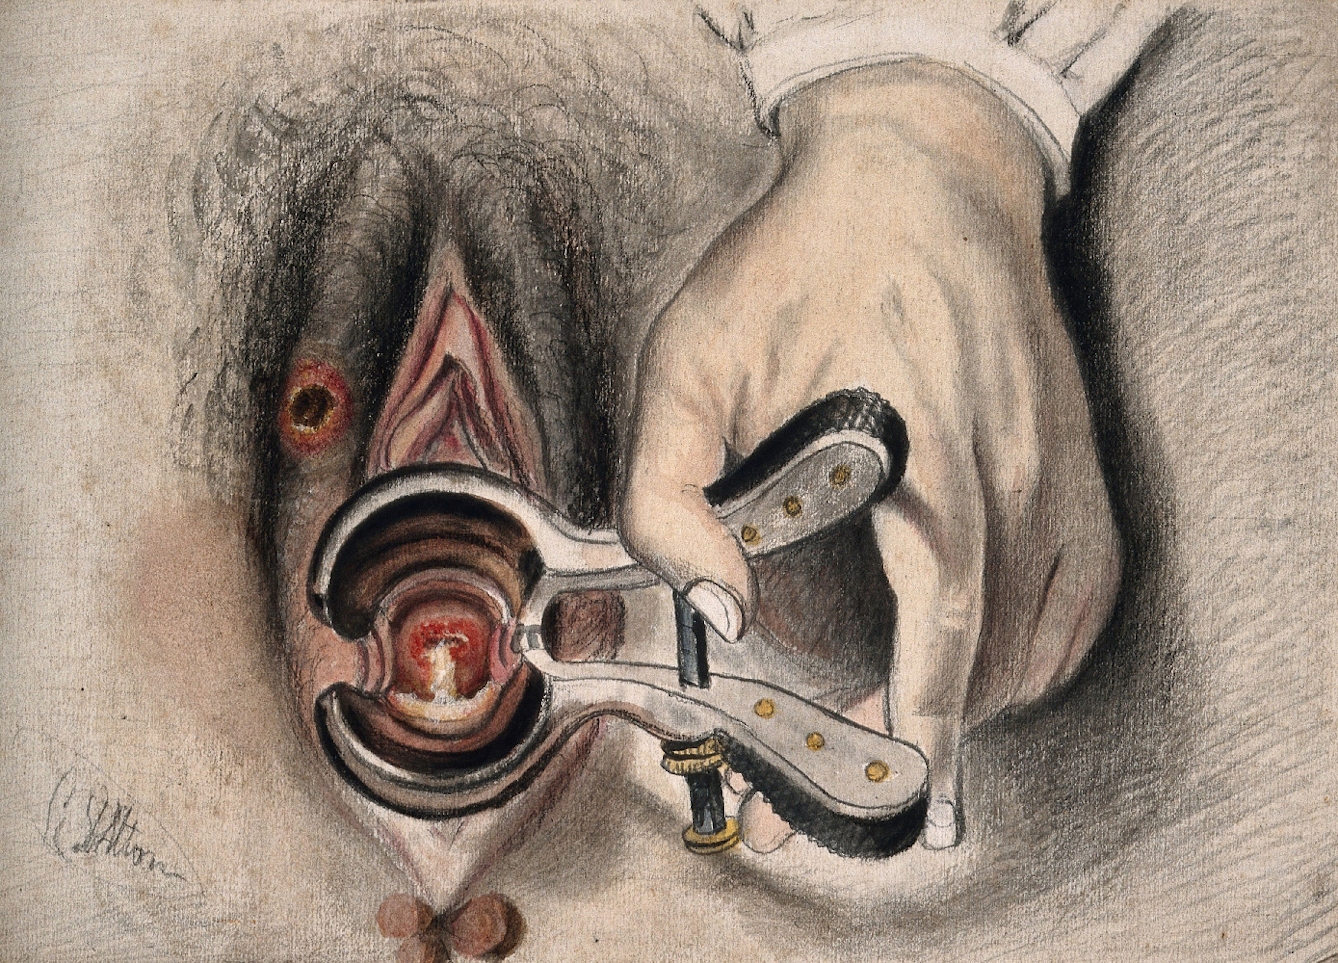 A pencil and gum arabic, with watercolour drawing of an infected sore on the female genitalia. The vagina is held open by a vaginal speculum held by a large hand. 